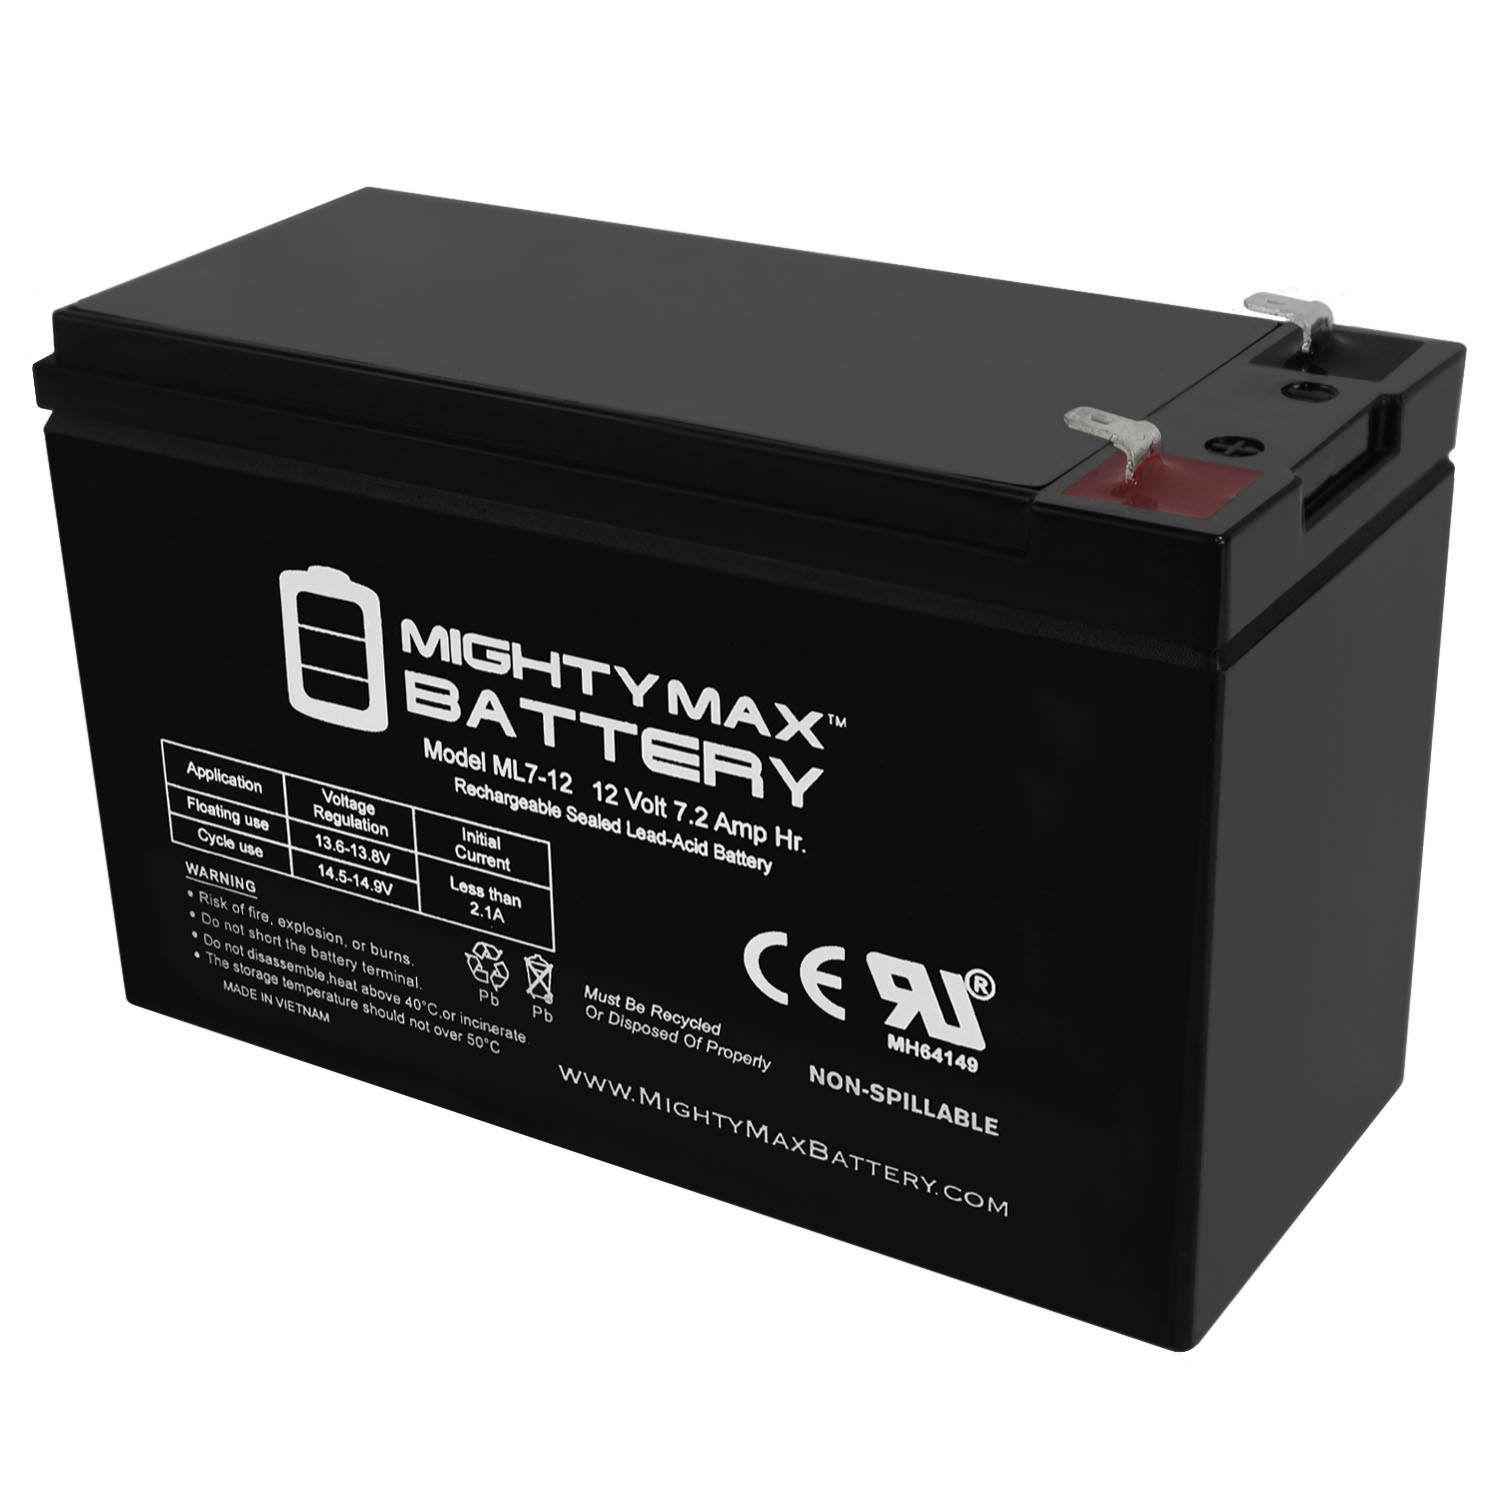 ML7-12 - 12V 7.2AH Replacement Battery for BELKIN F6C1500-TW-RK